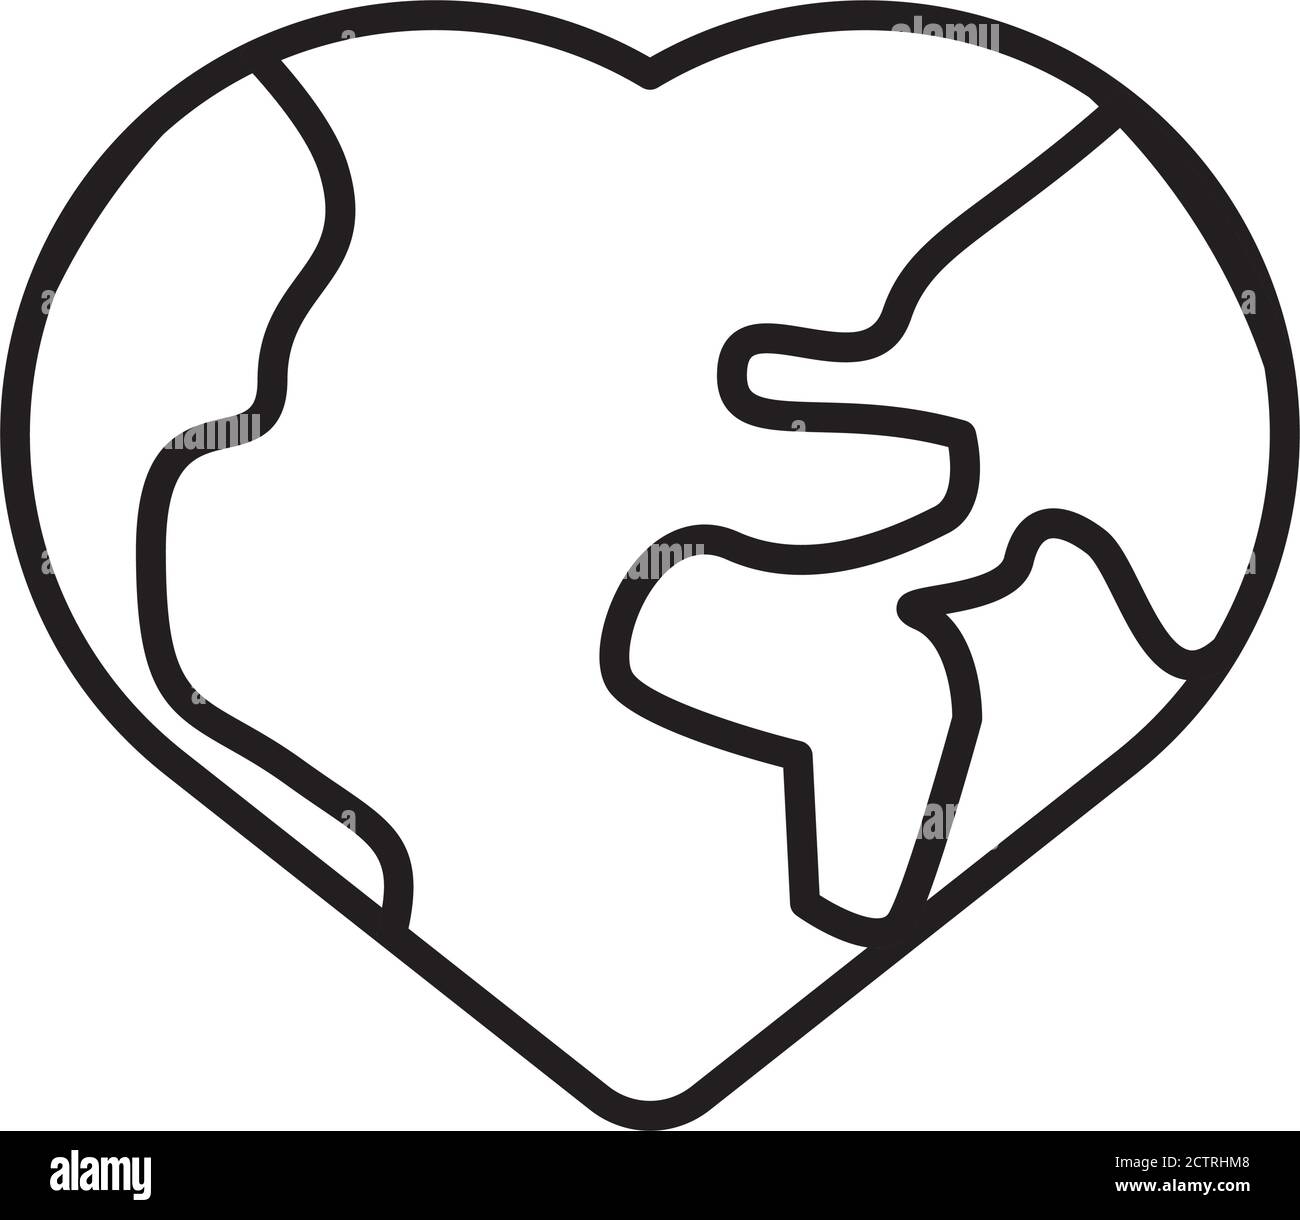 world planet earth with heart shape 1838887 Vector Art at Vecteezy